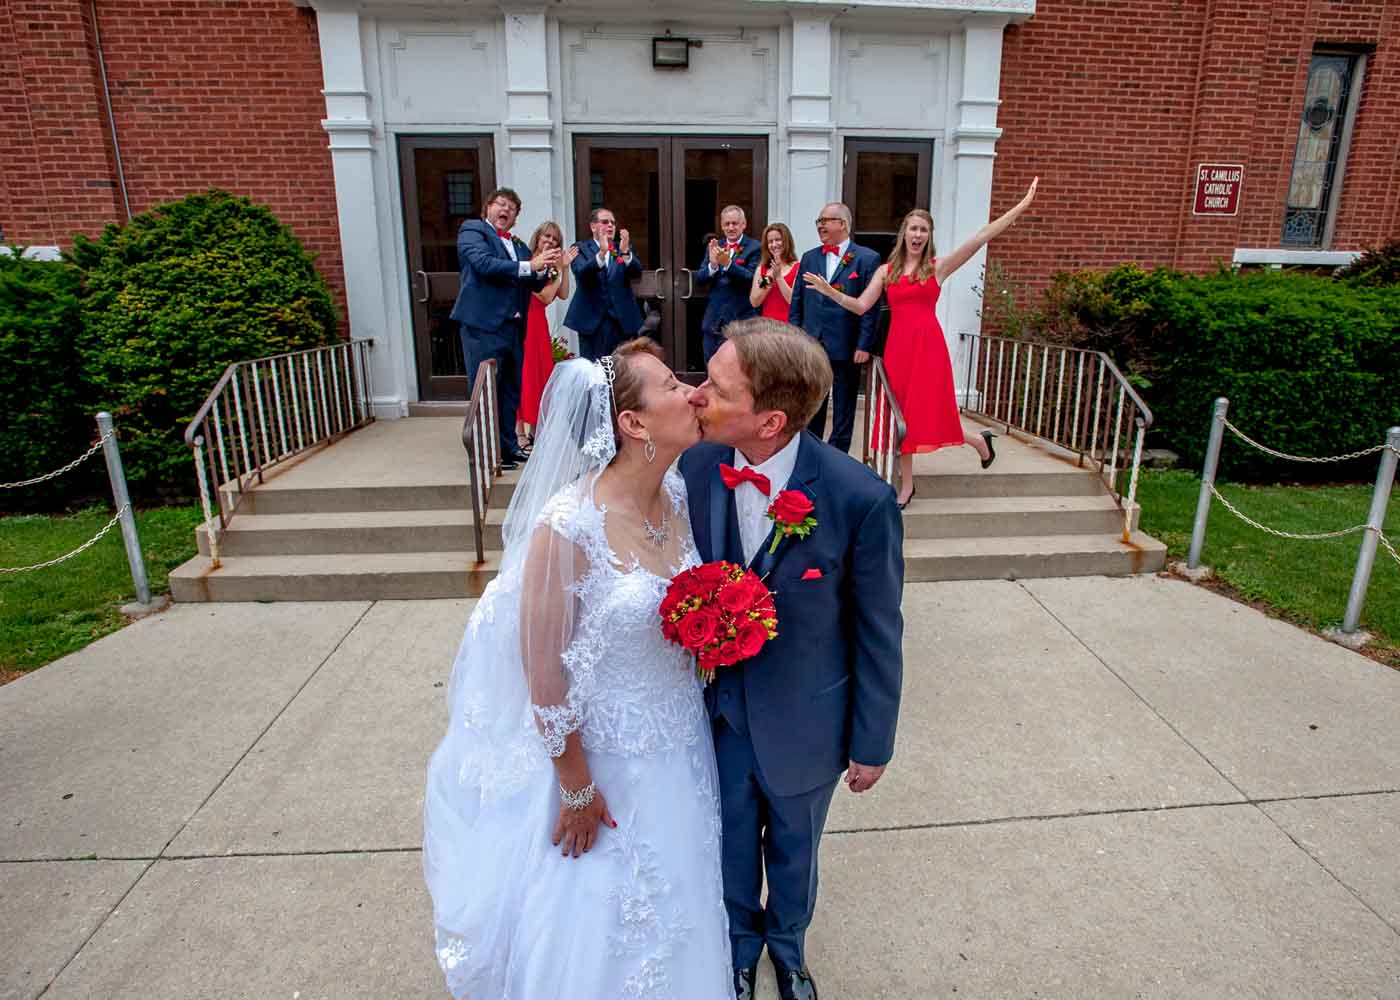 Bride and groom kissing with wedding party behind in front of church entrance